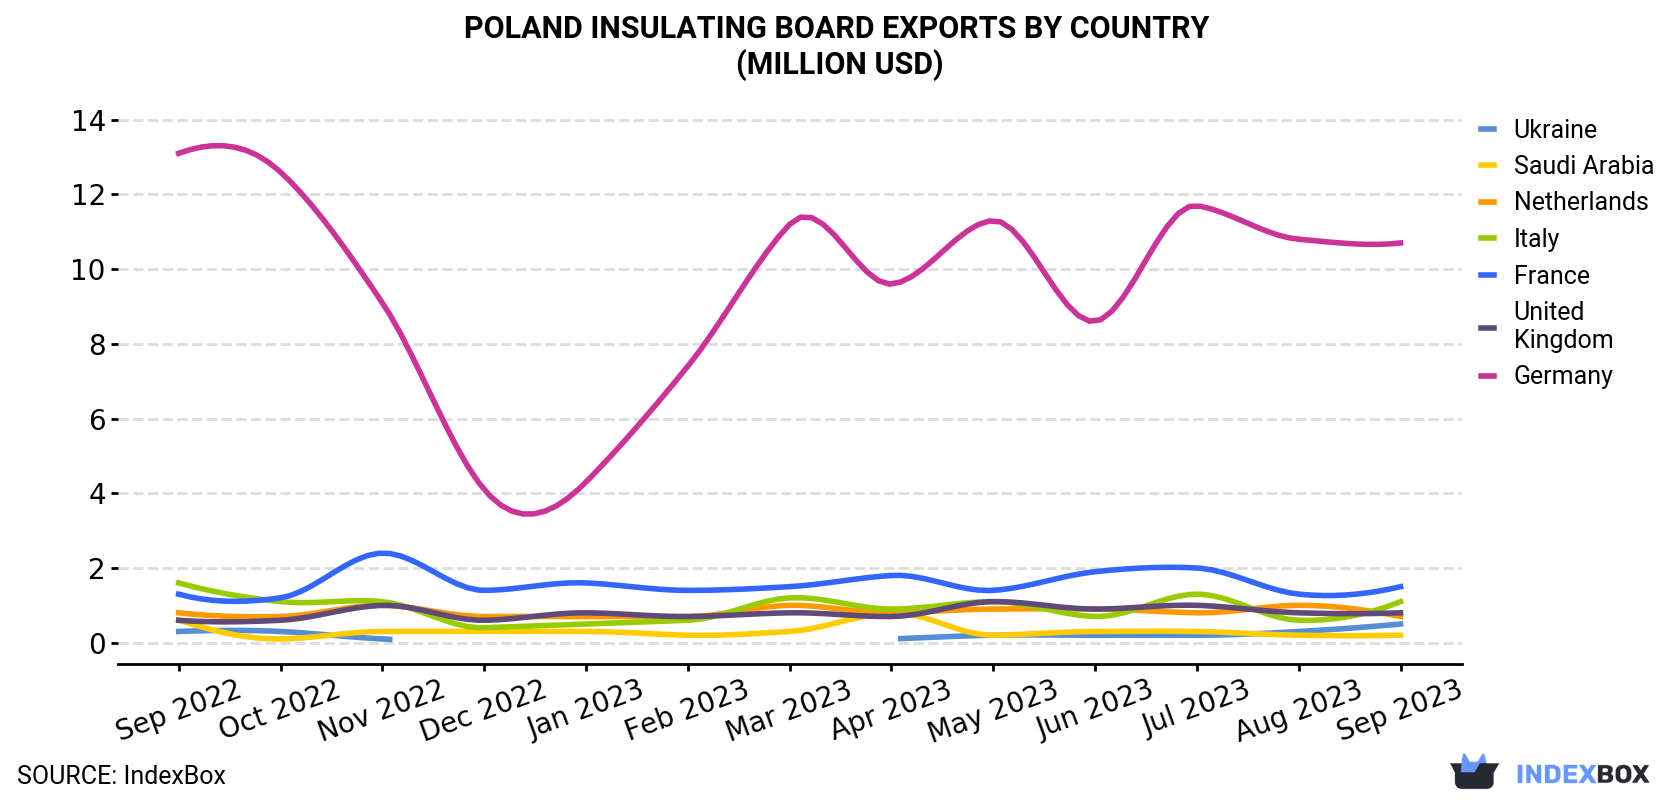 Poland Insulating Board Exports By Country (Million USD)